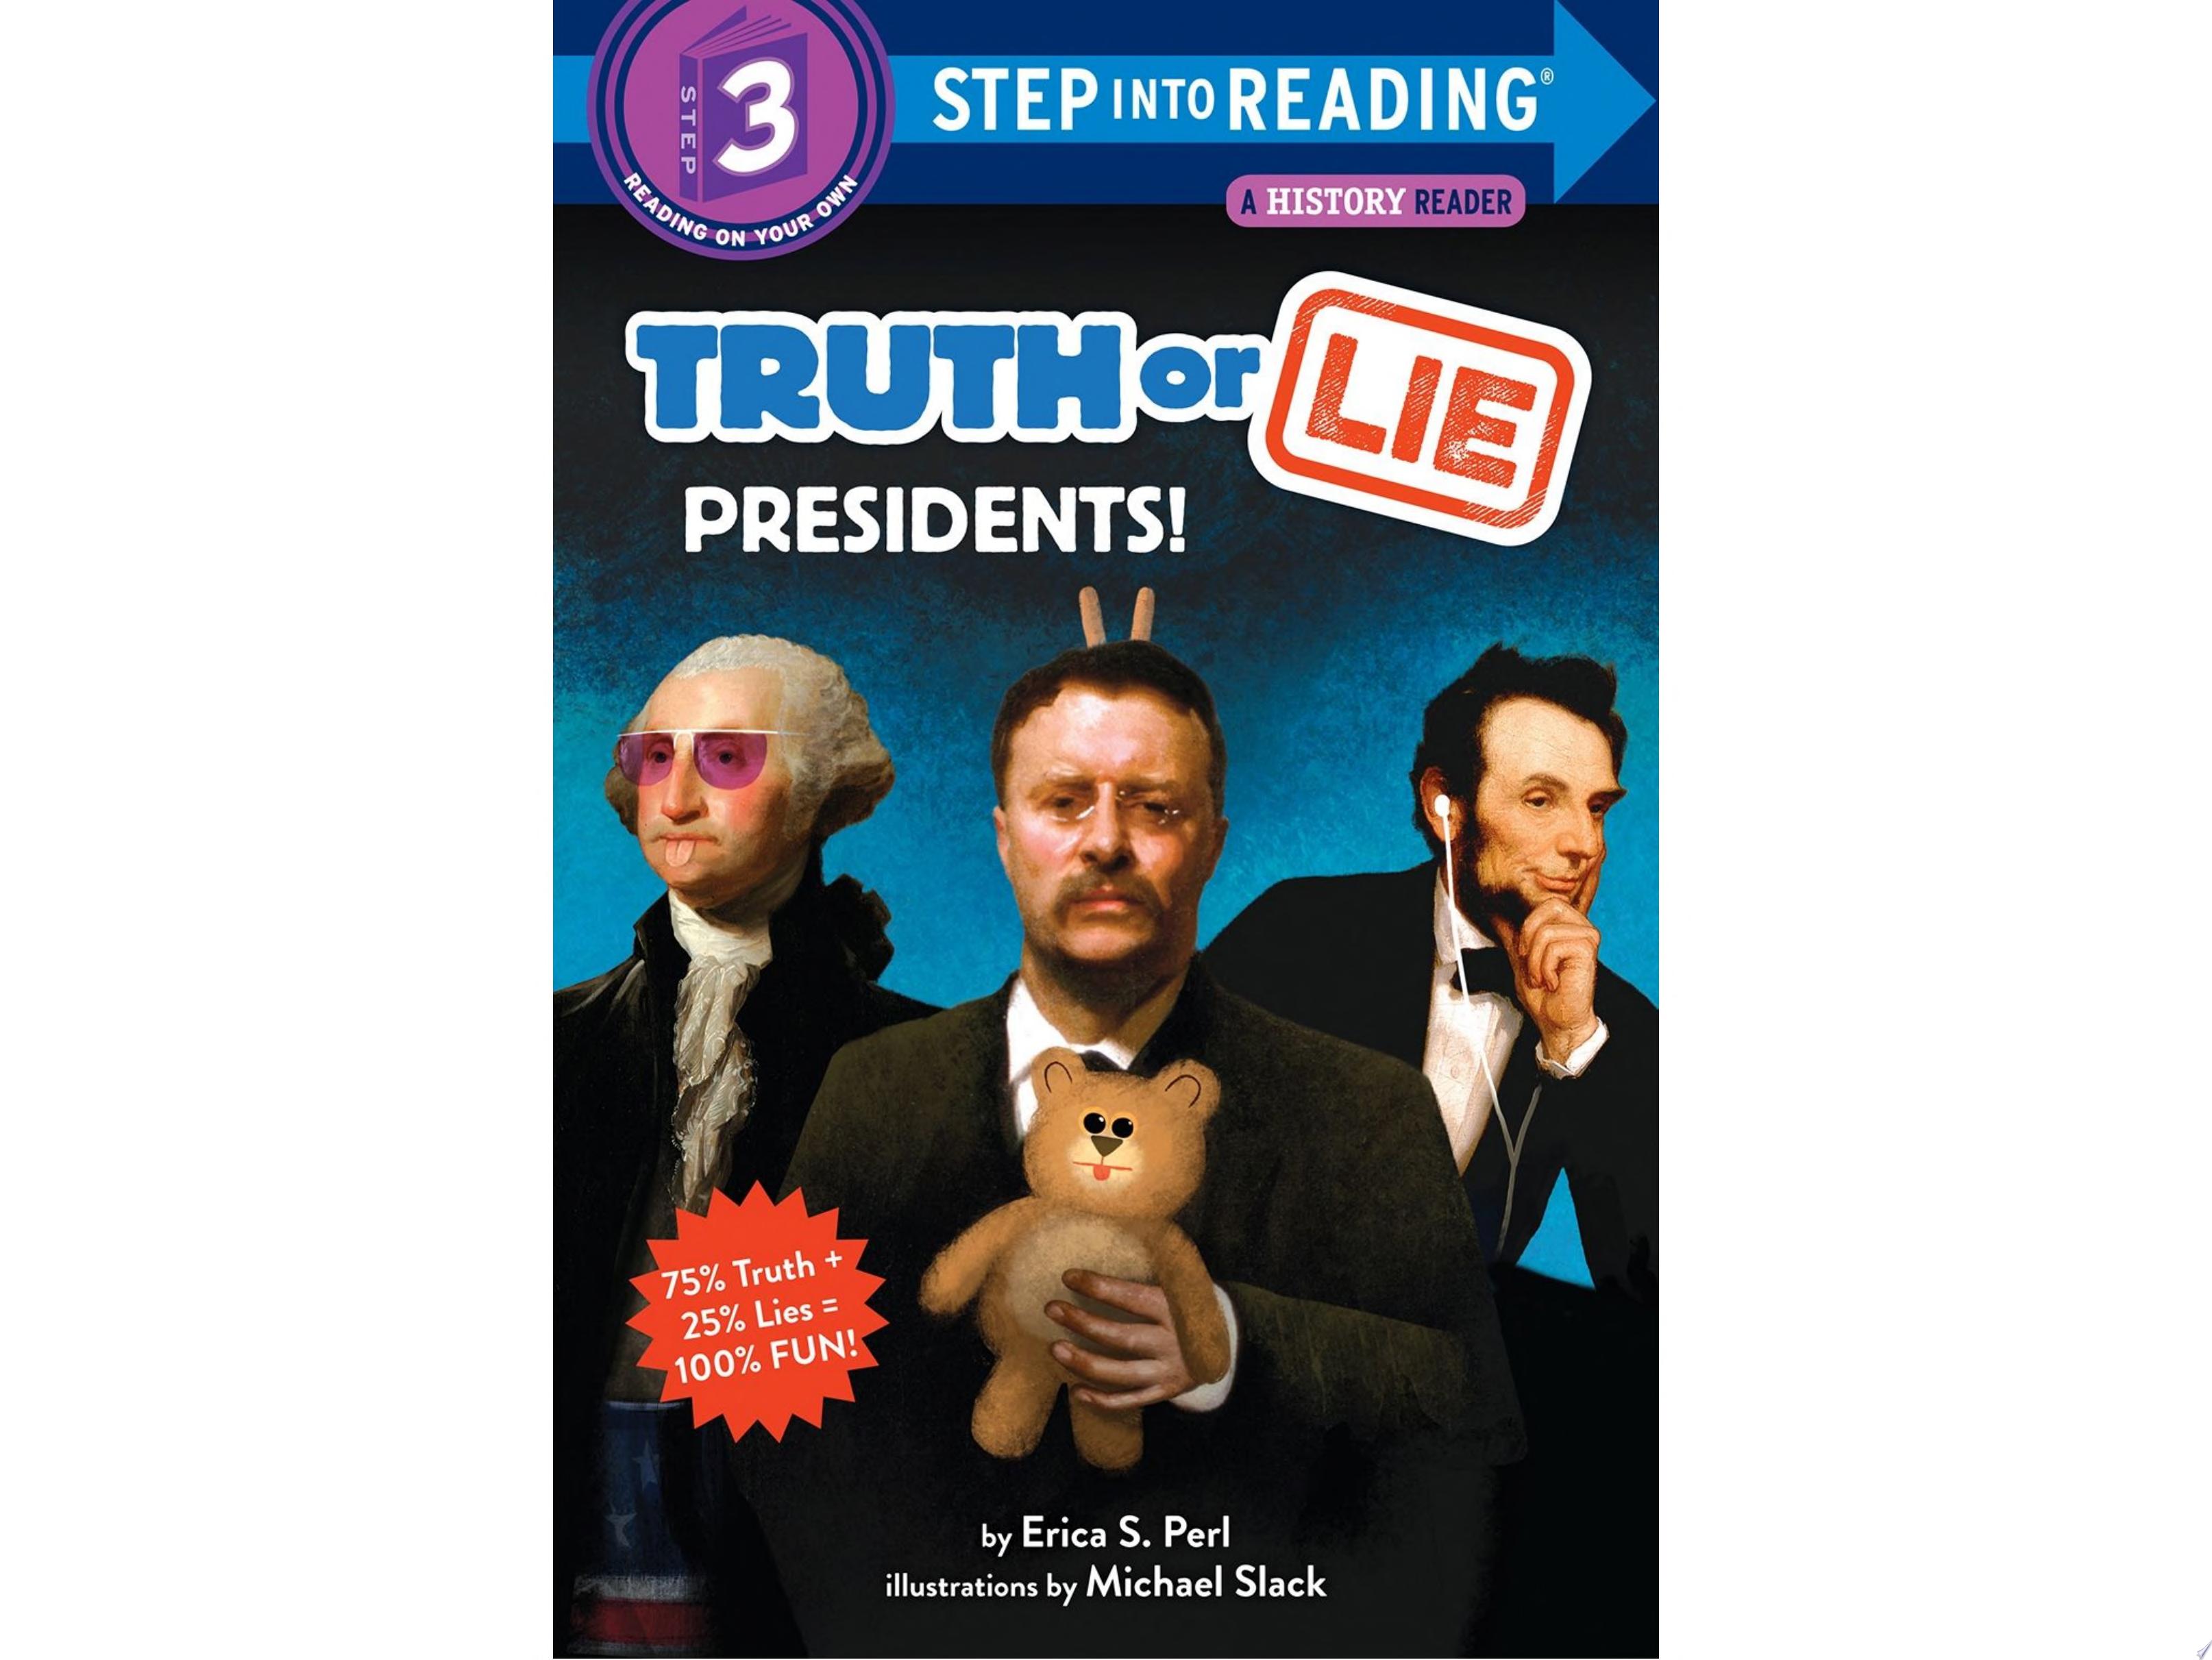 Image for "Truth or Lie: Presidents!"